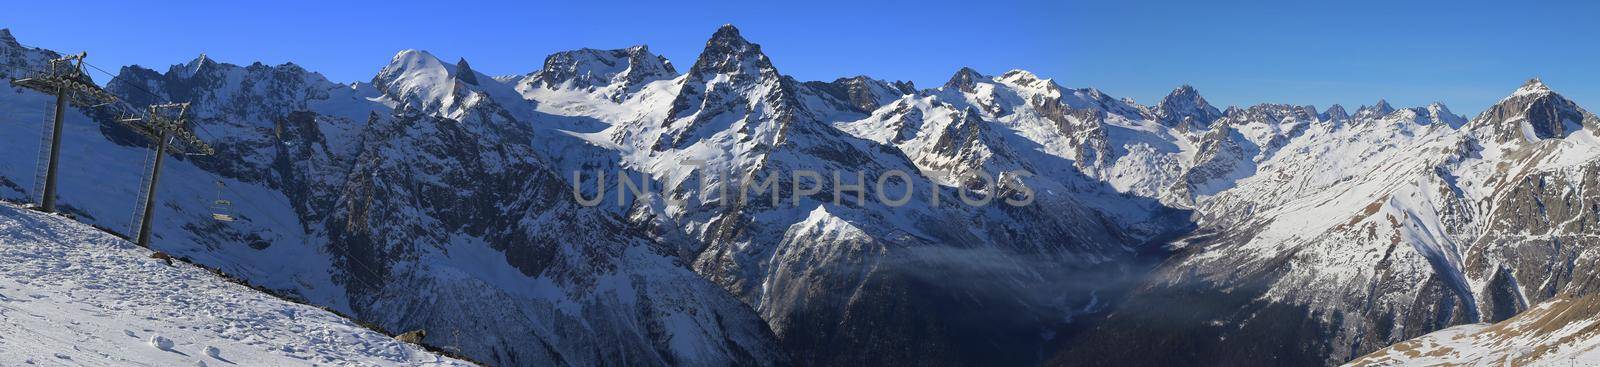 Panorama of winter mountains by Mariakray